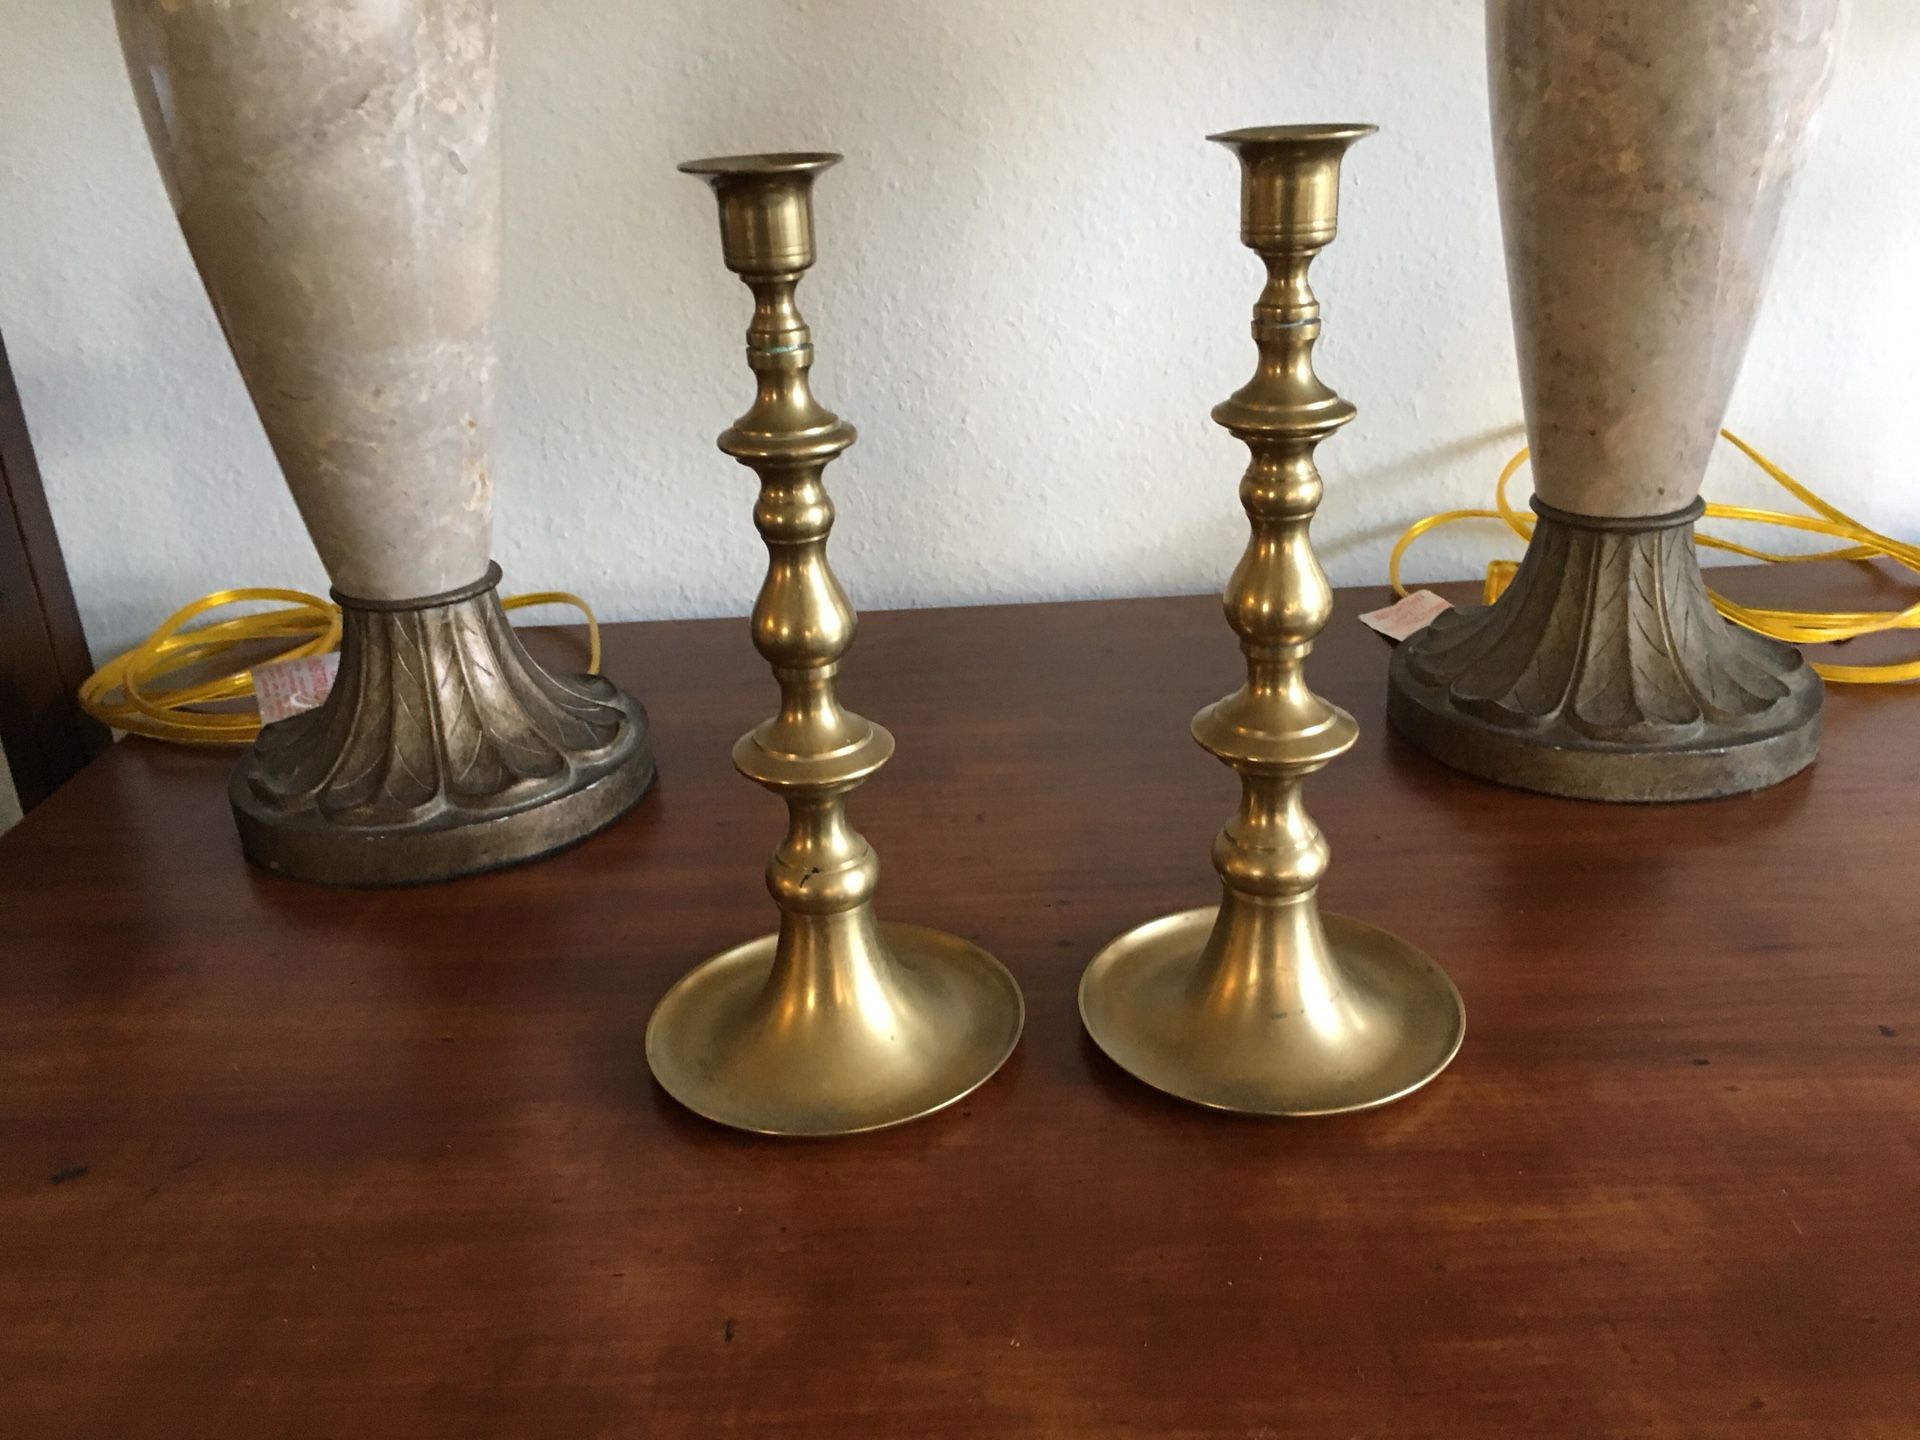 FREE Two solid brass candleholders